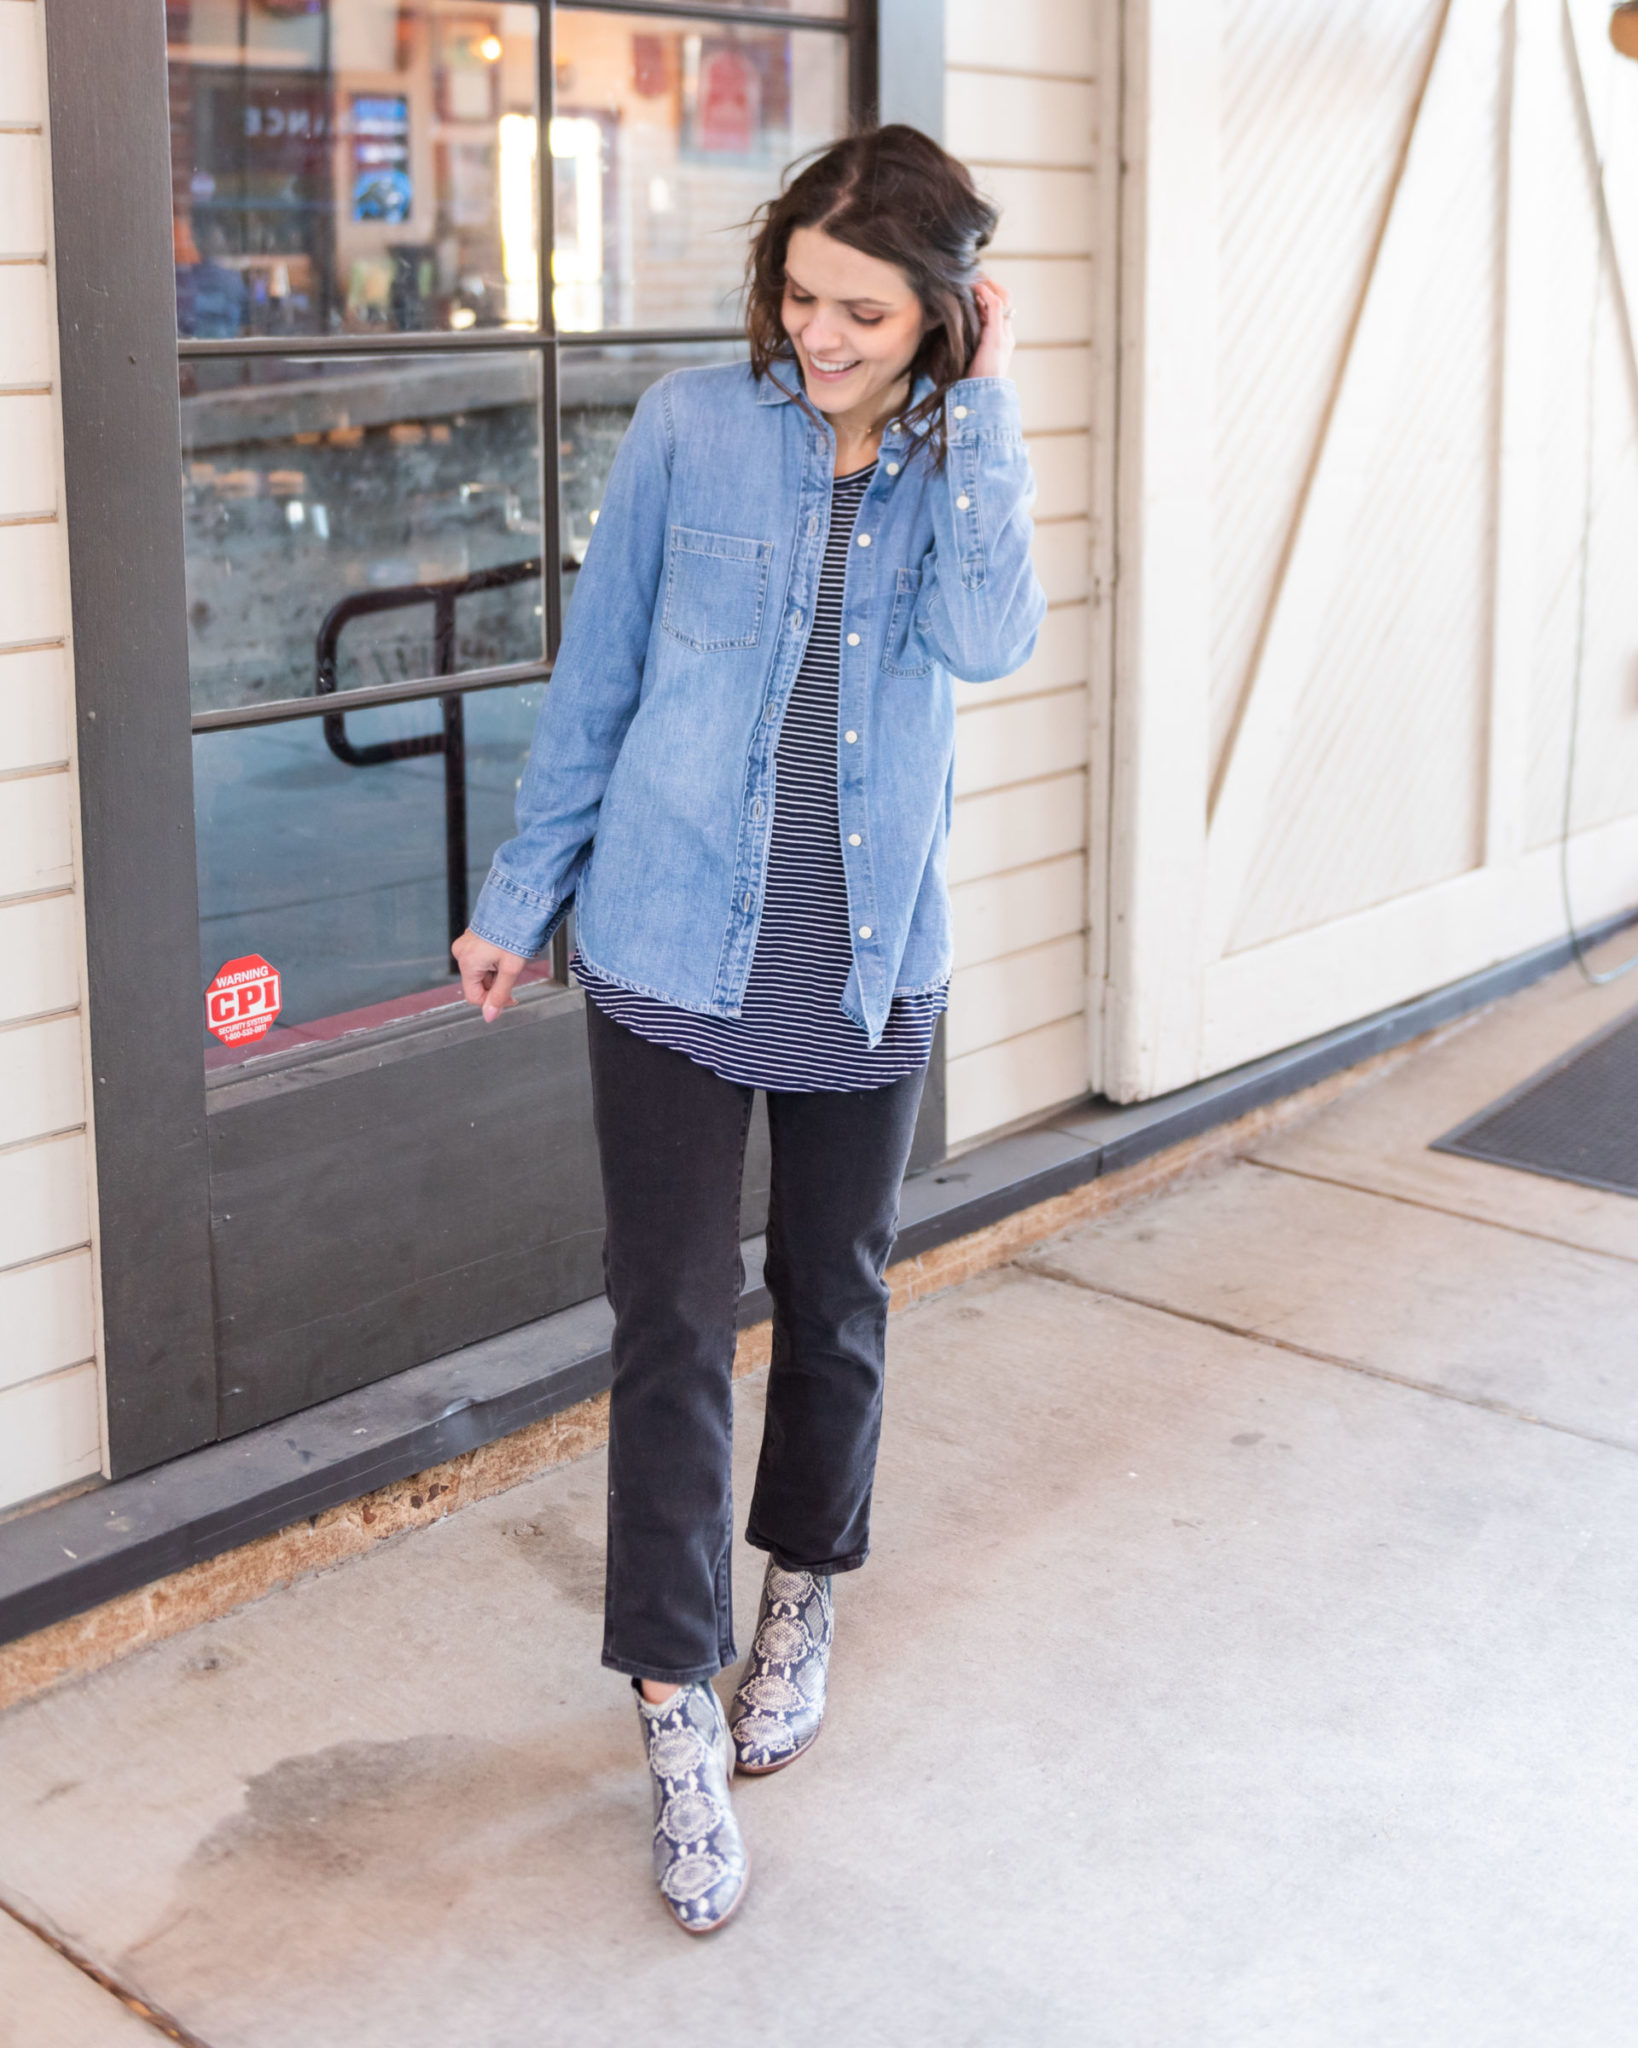 8 ways to style a denim chambray shirt - the Sarah Stories